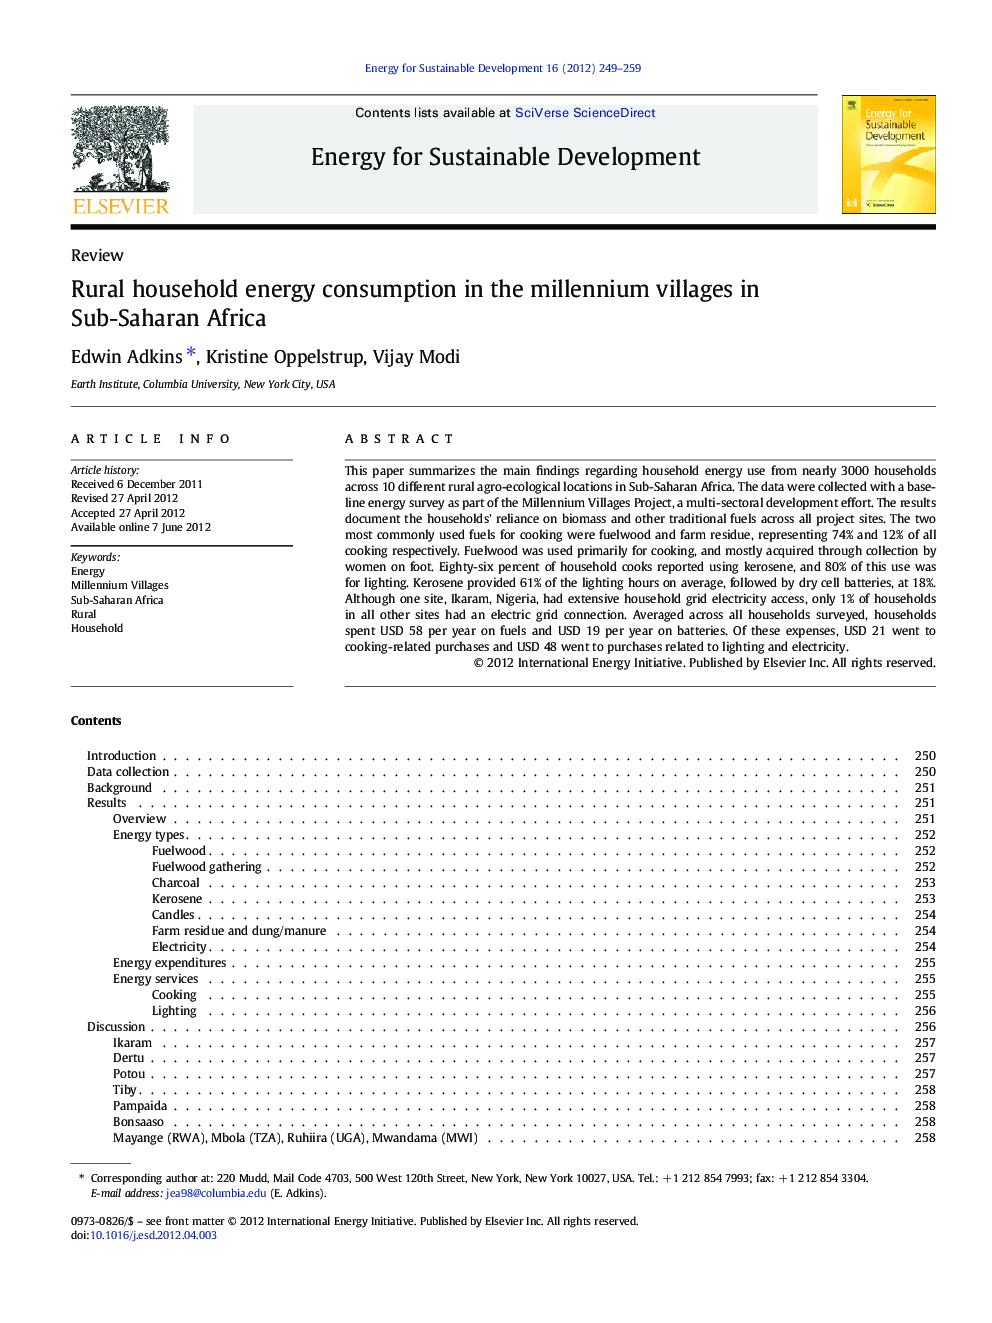 Rural household energy consumption in the millennium villages in Sub-Saharan Africa